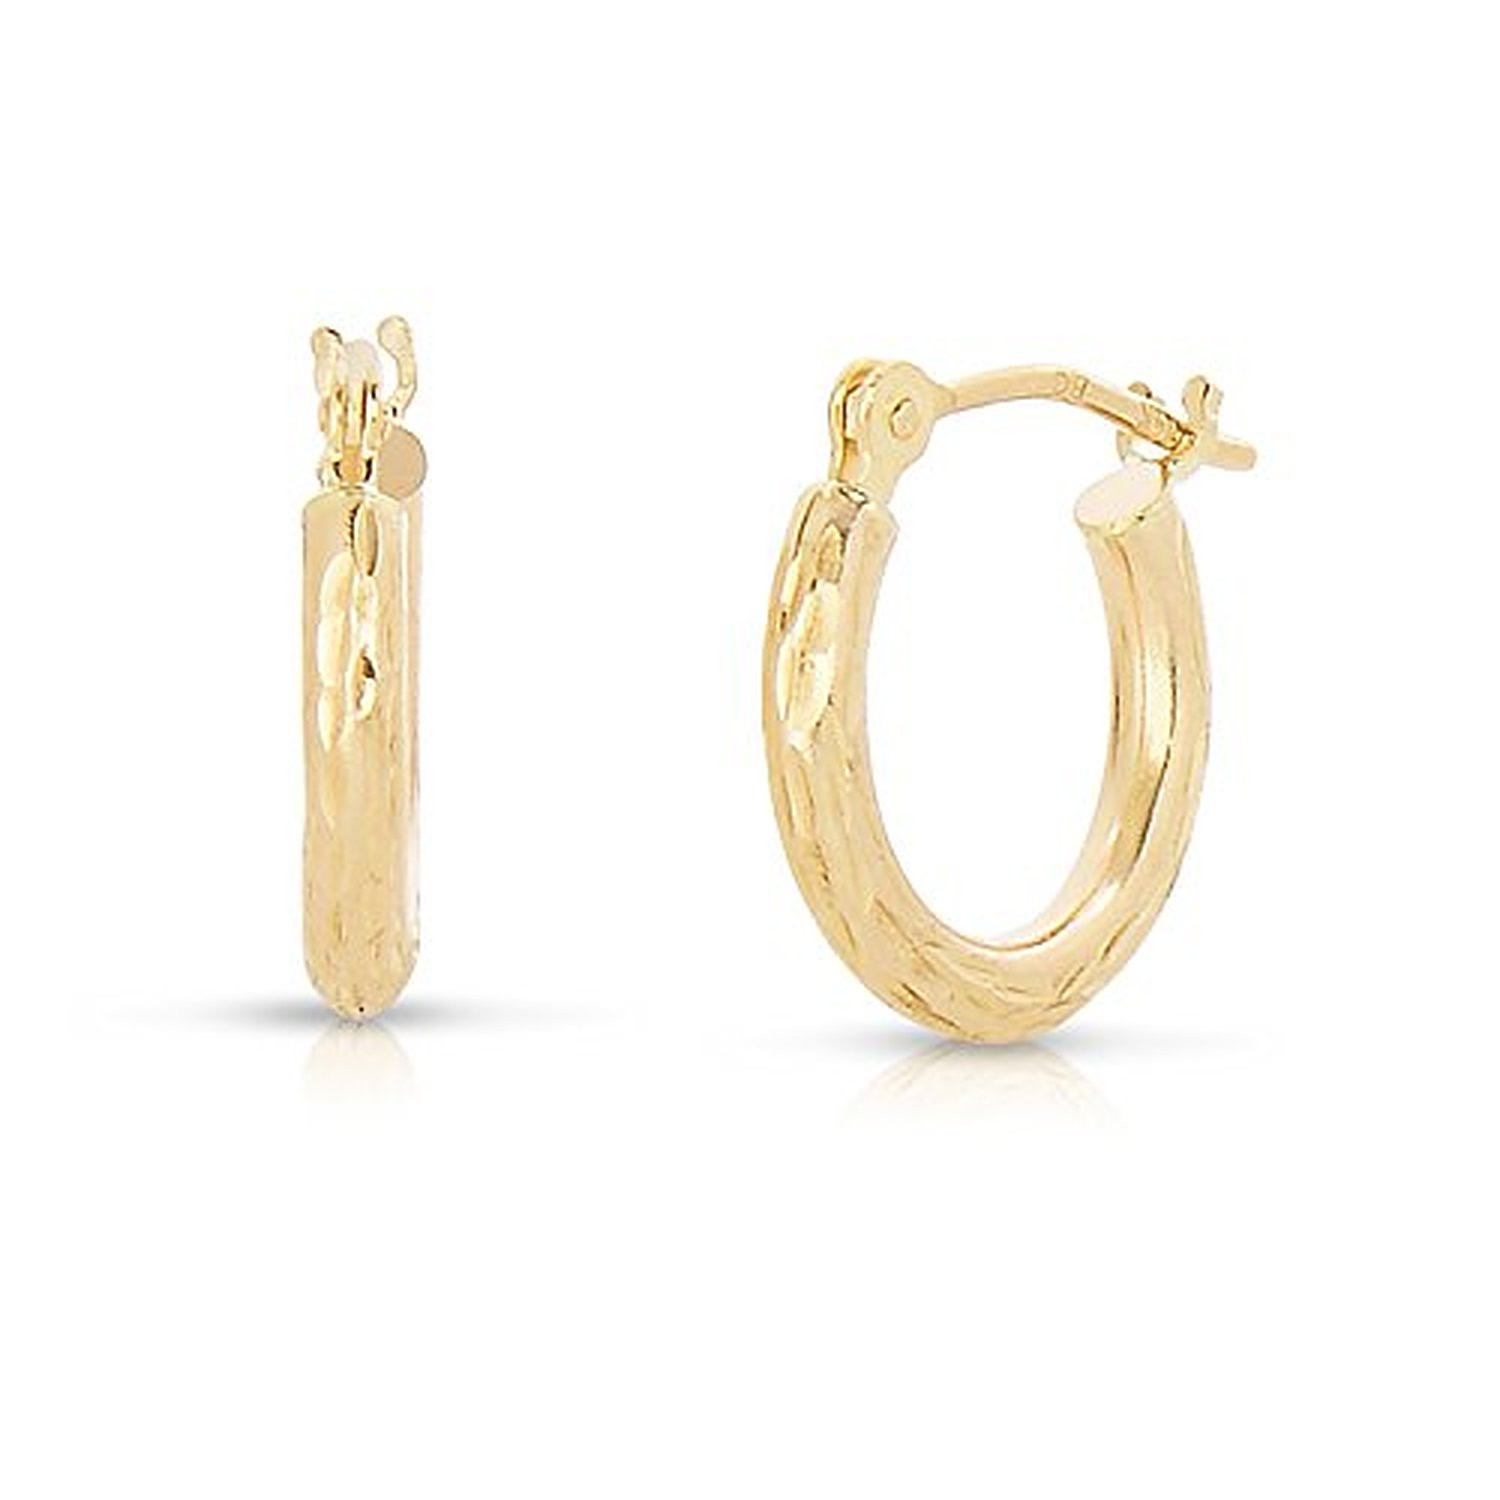 Walmart Gold Earrings
 Art and Molly Tiny 14k Yellow Gold Diamond cut Engraved